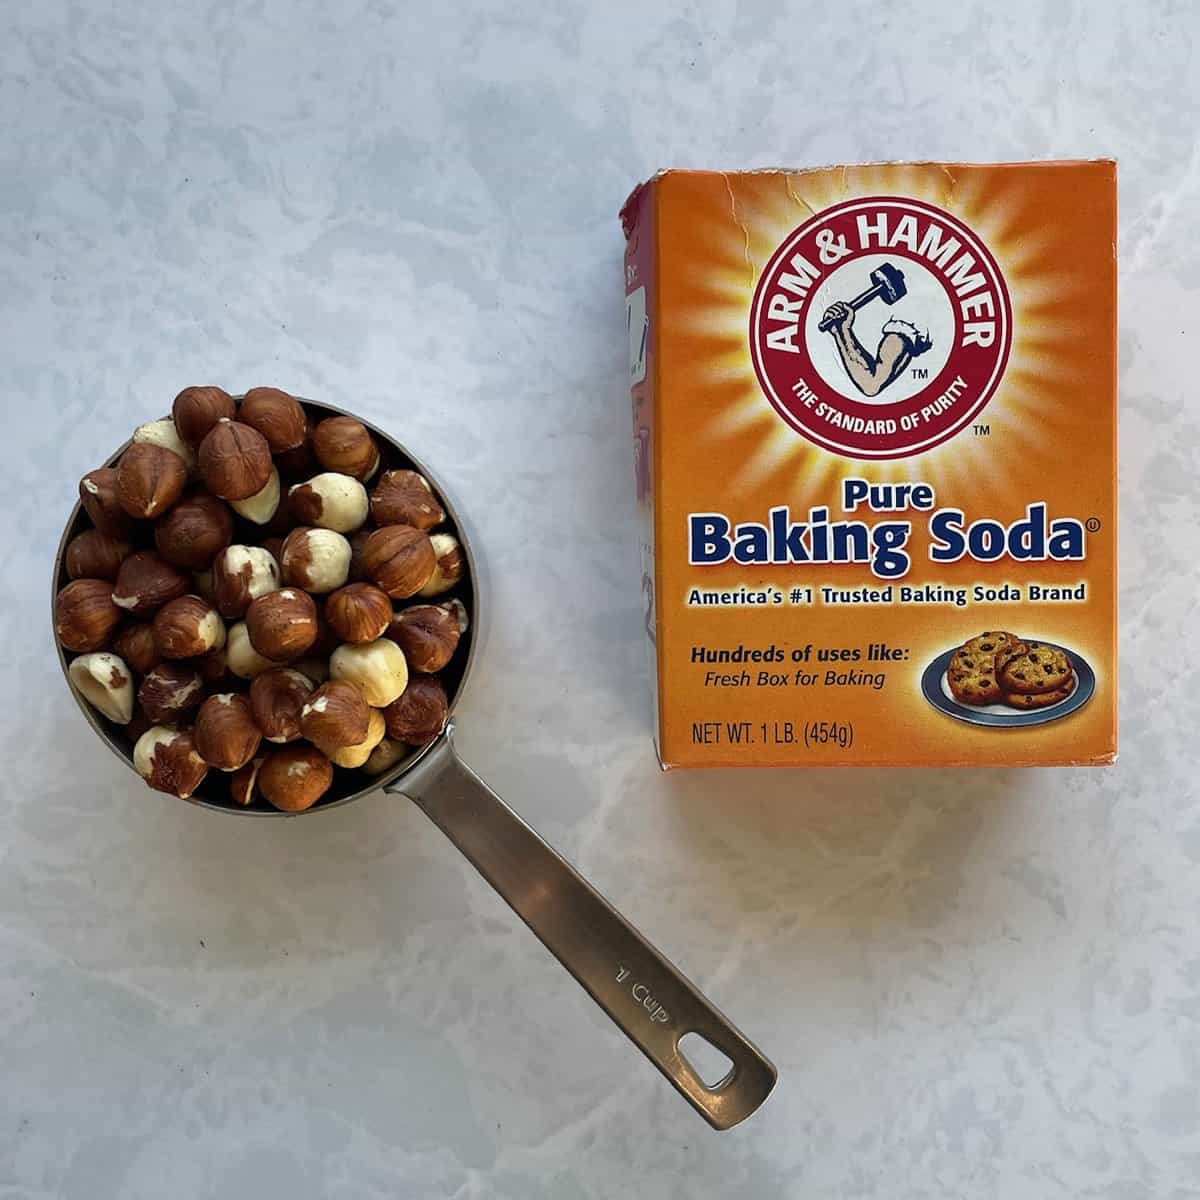 cup of unpeeled hazelnuts and box of baking soda on a countertop.